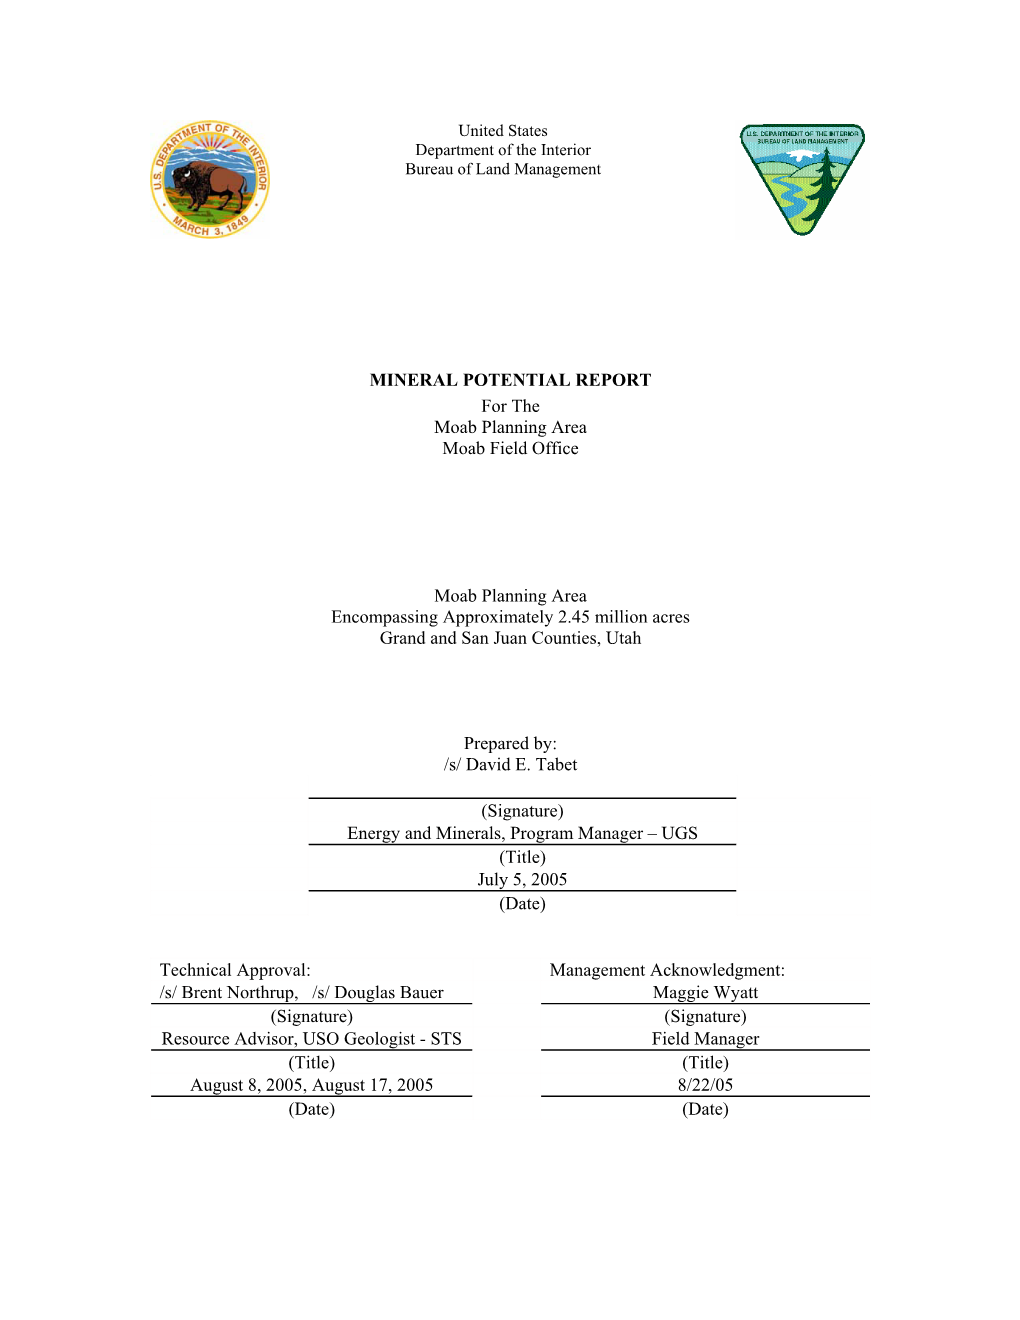 MINERAL POTENTIAL REPORT for the Moab Planning Area Moab Field Office